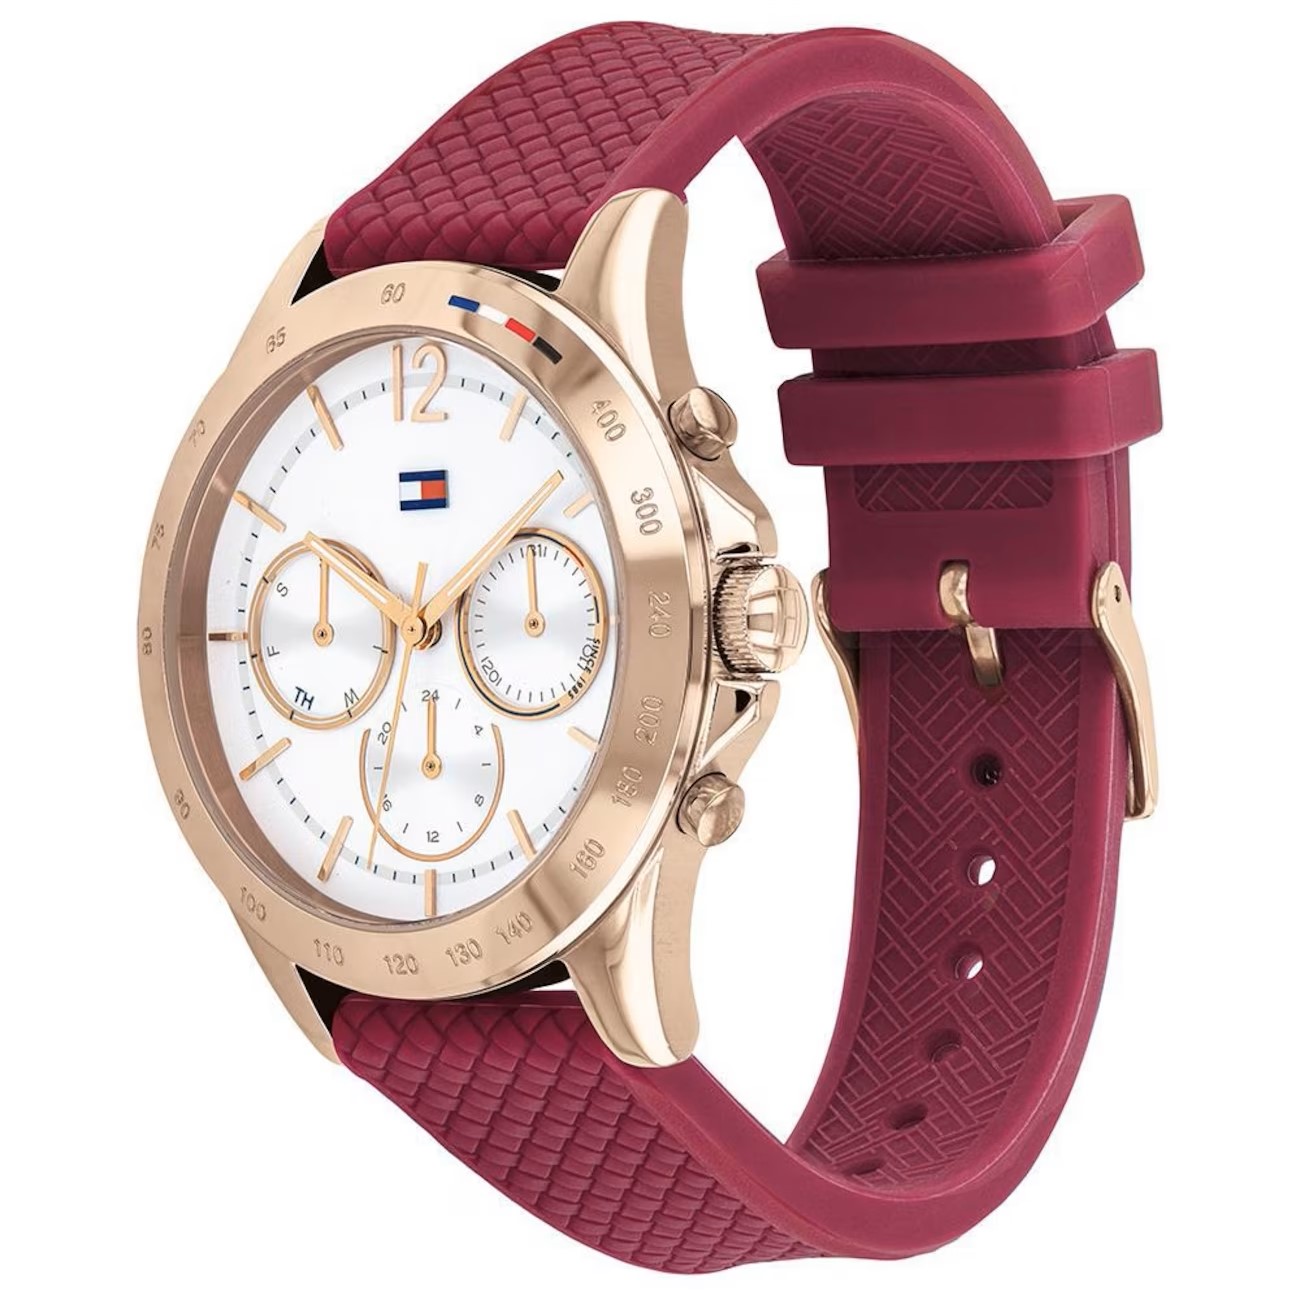 ĐỒNG HỒ ĐEO TAY NỮ TOMMY HILFIGER ROSE GOLD SPORT WATCH WITH RED SILICONE STRAP HAVEN ANALOG WATCH FOR WOMEN TH1782200W 11